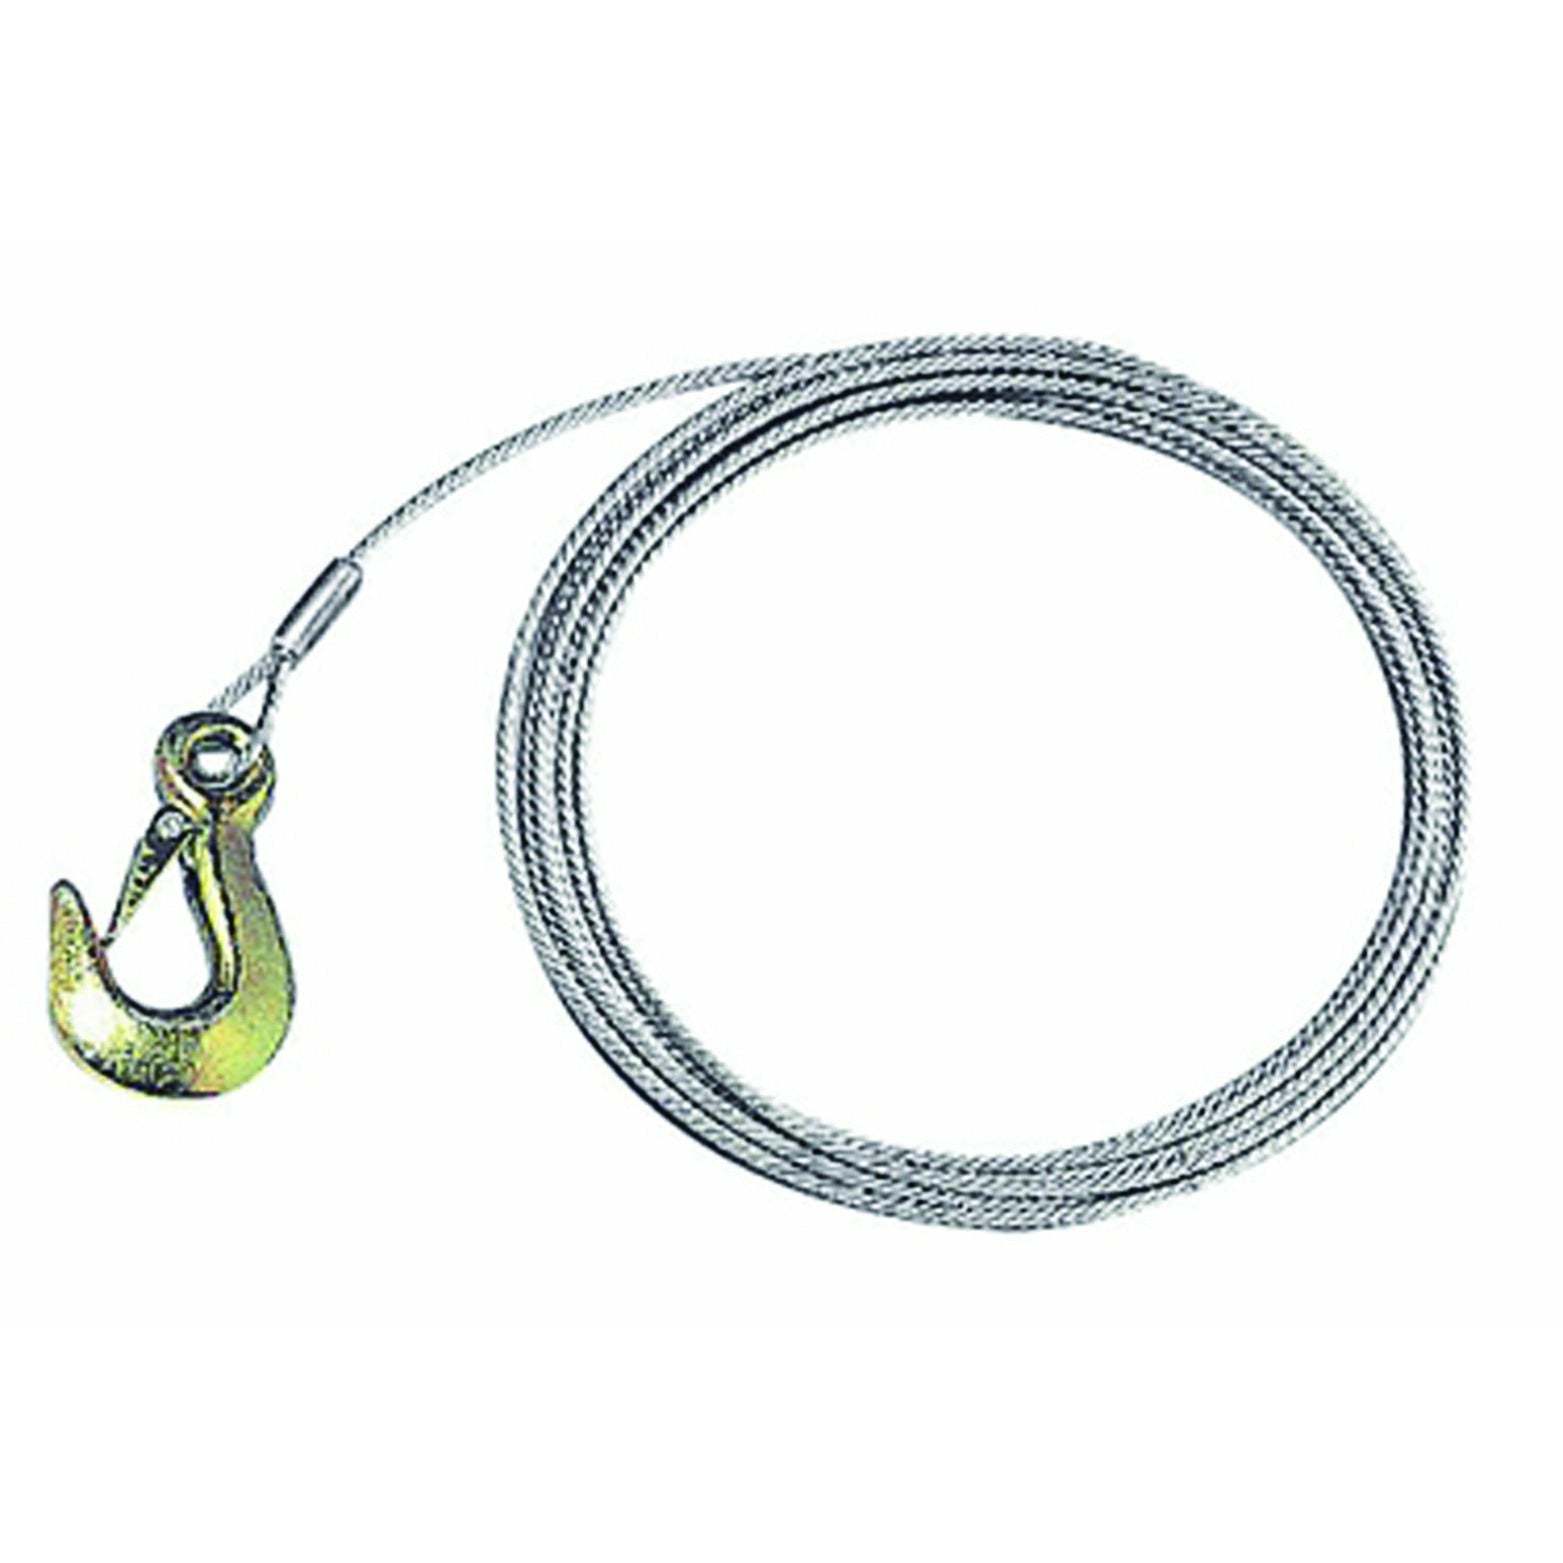 Talamex Winch Cable Wt-70C-8 M 76740108